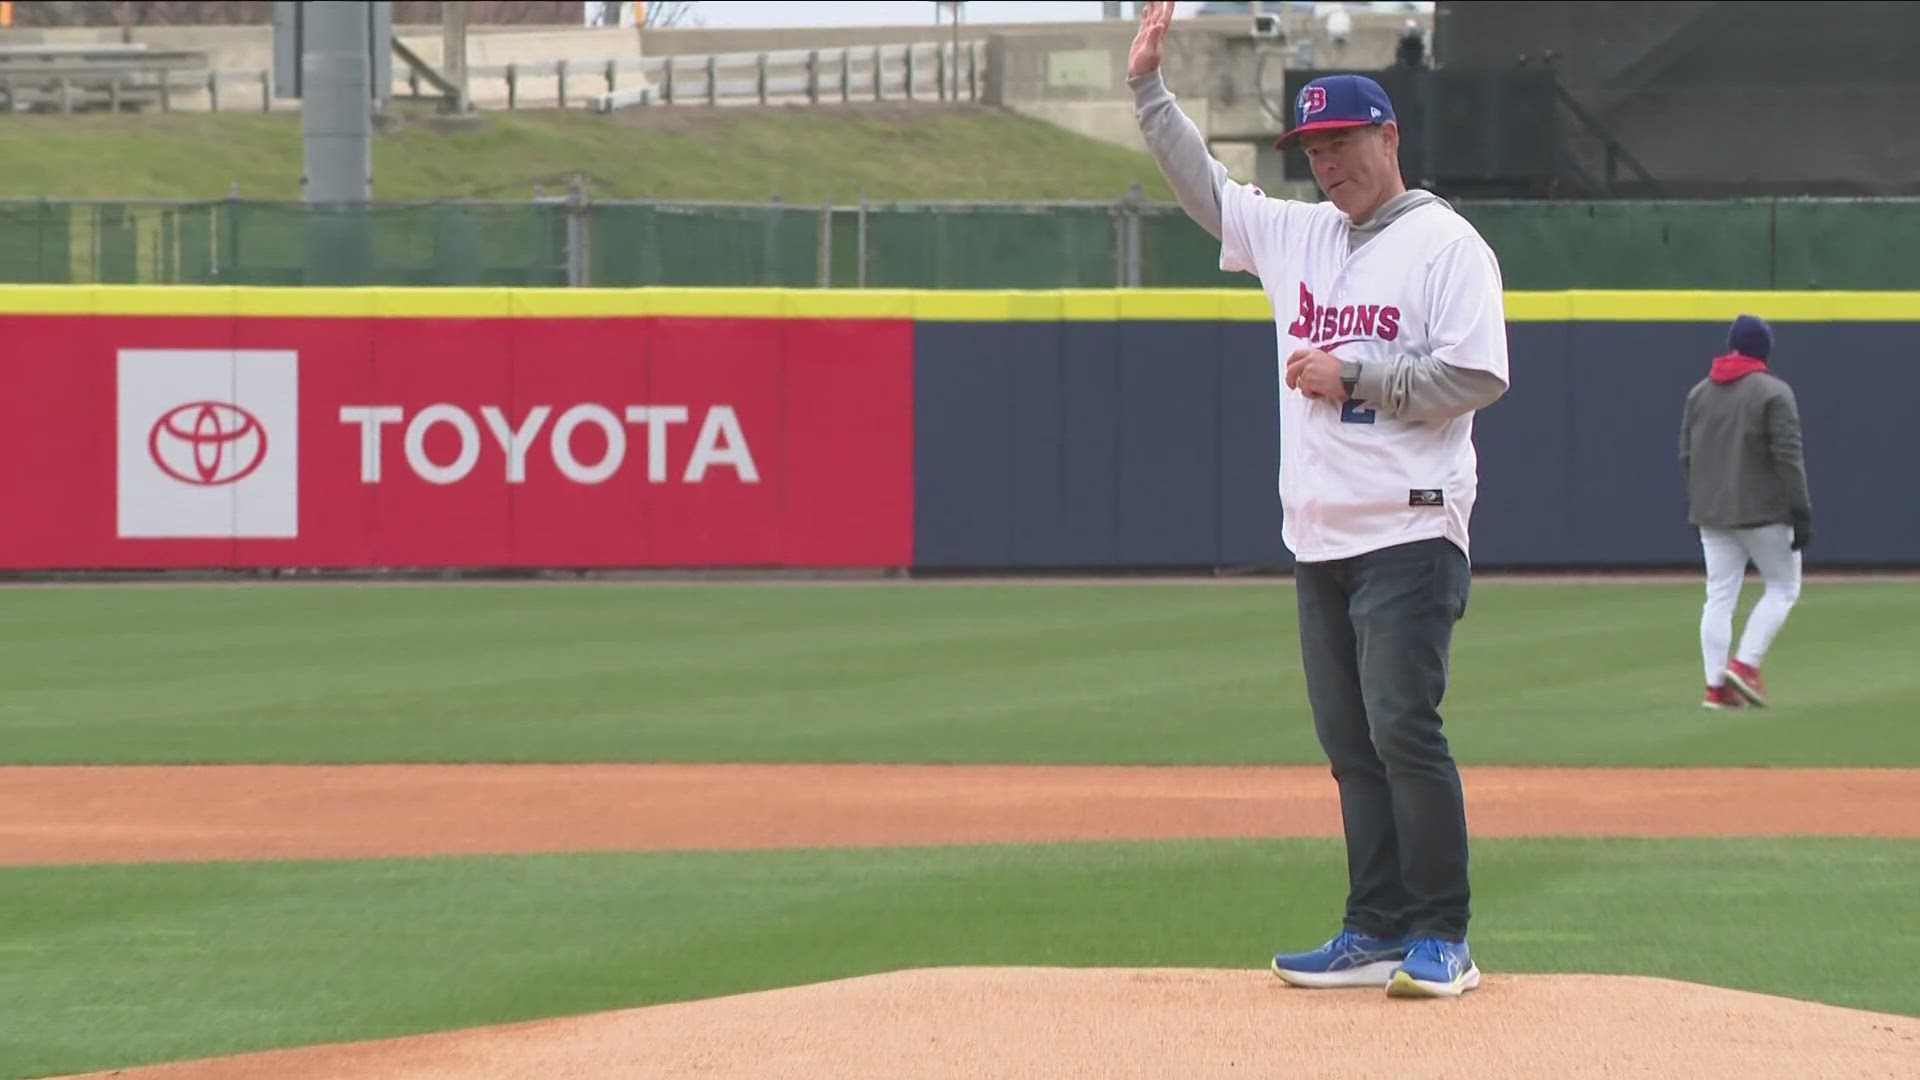 Bills general manager Brandon Beane threw out the first ceremonial pitch at the Bisons' season-opener on Friday.